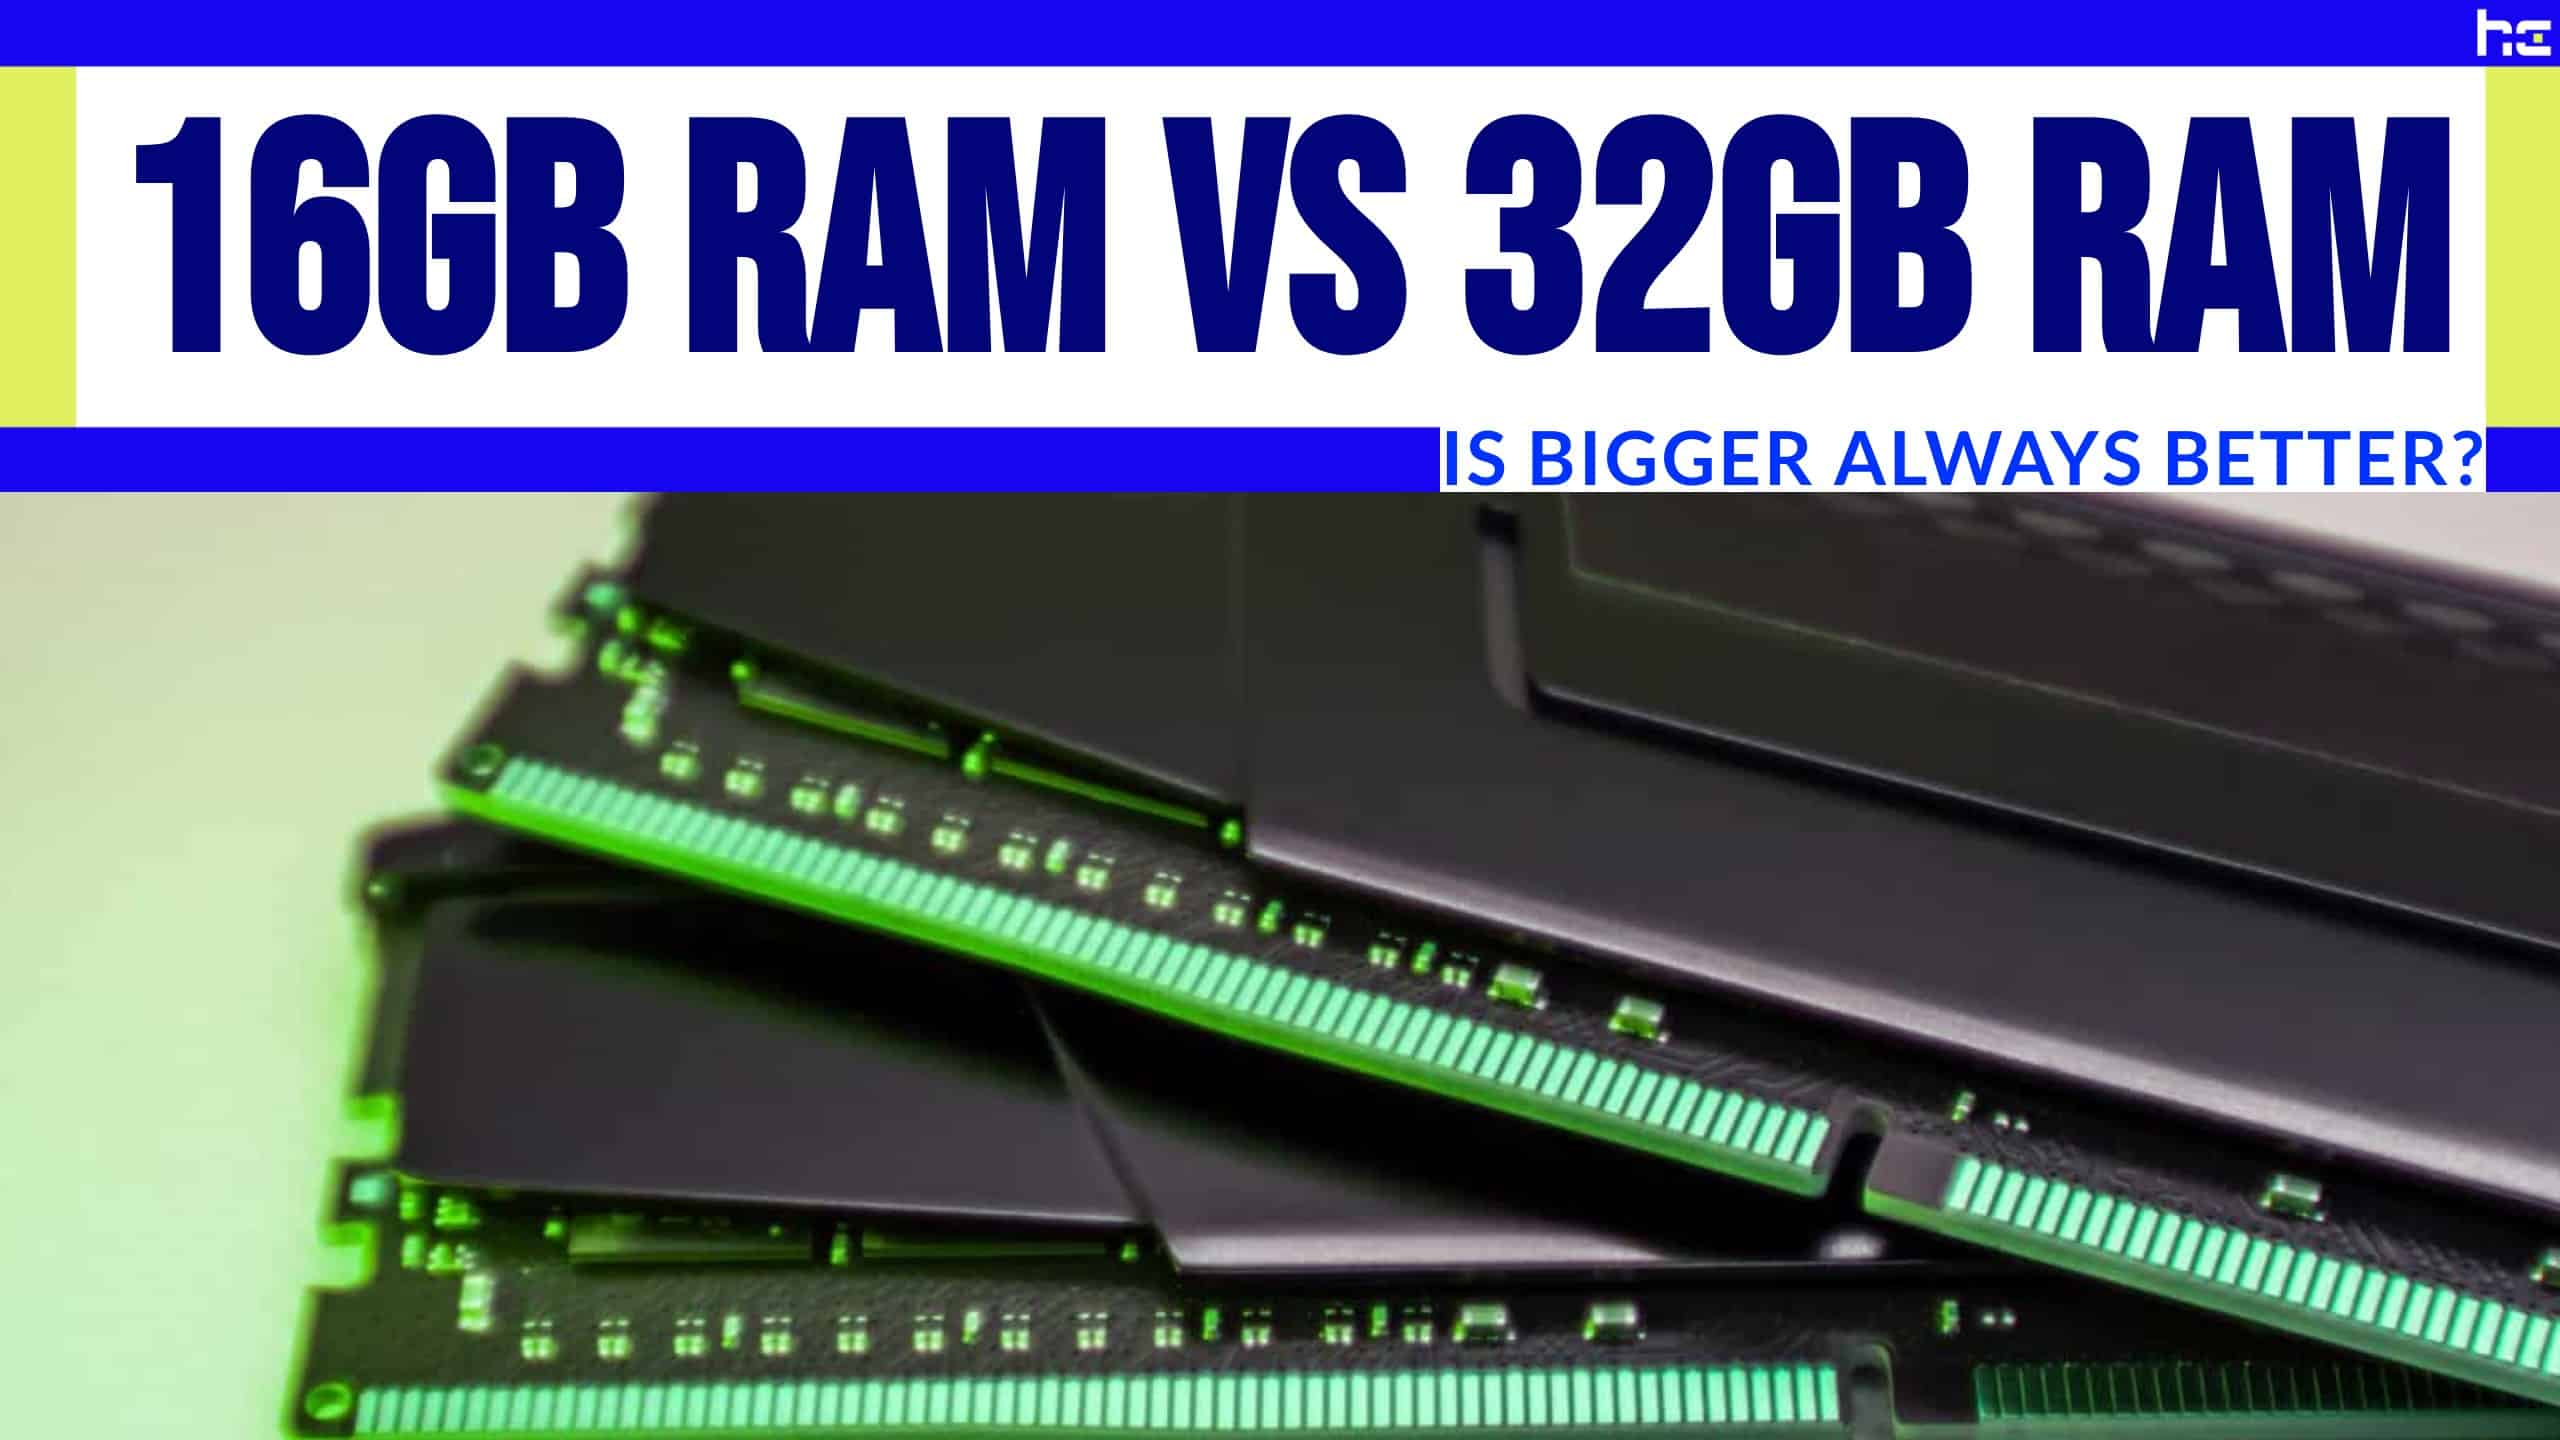 featured image for 16gb ram vs 32gb ram